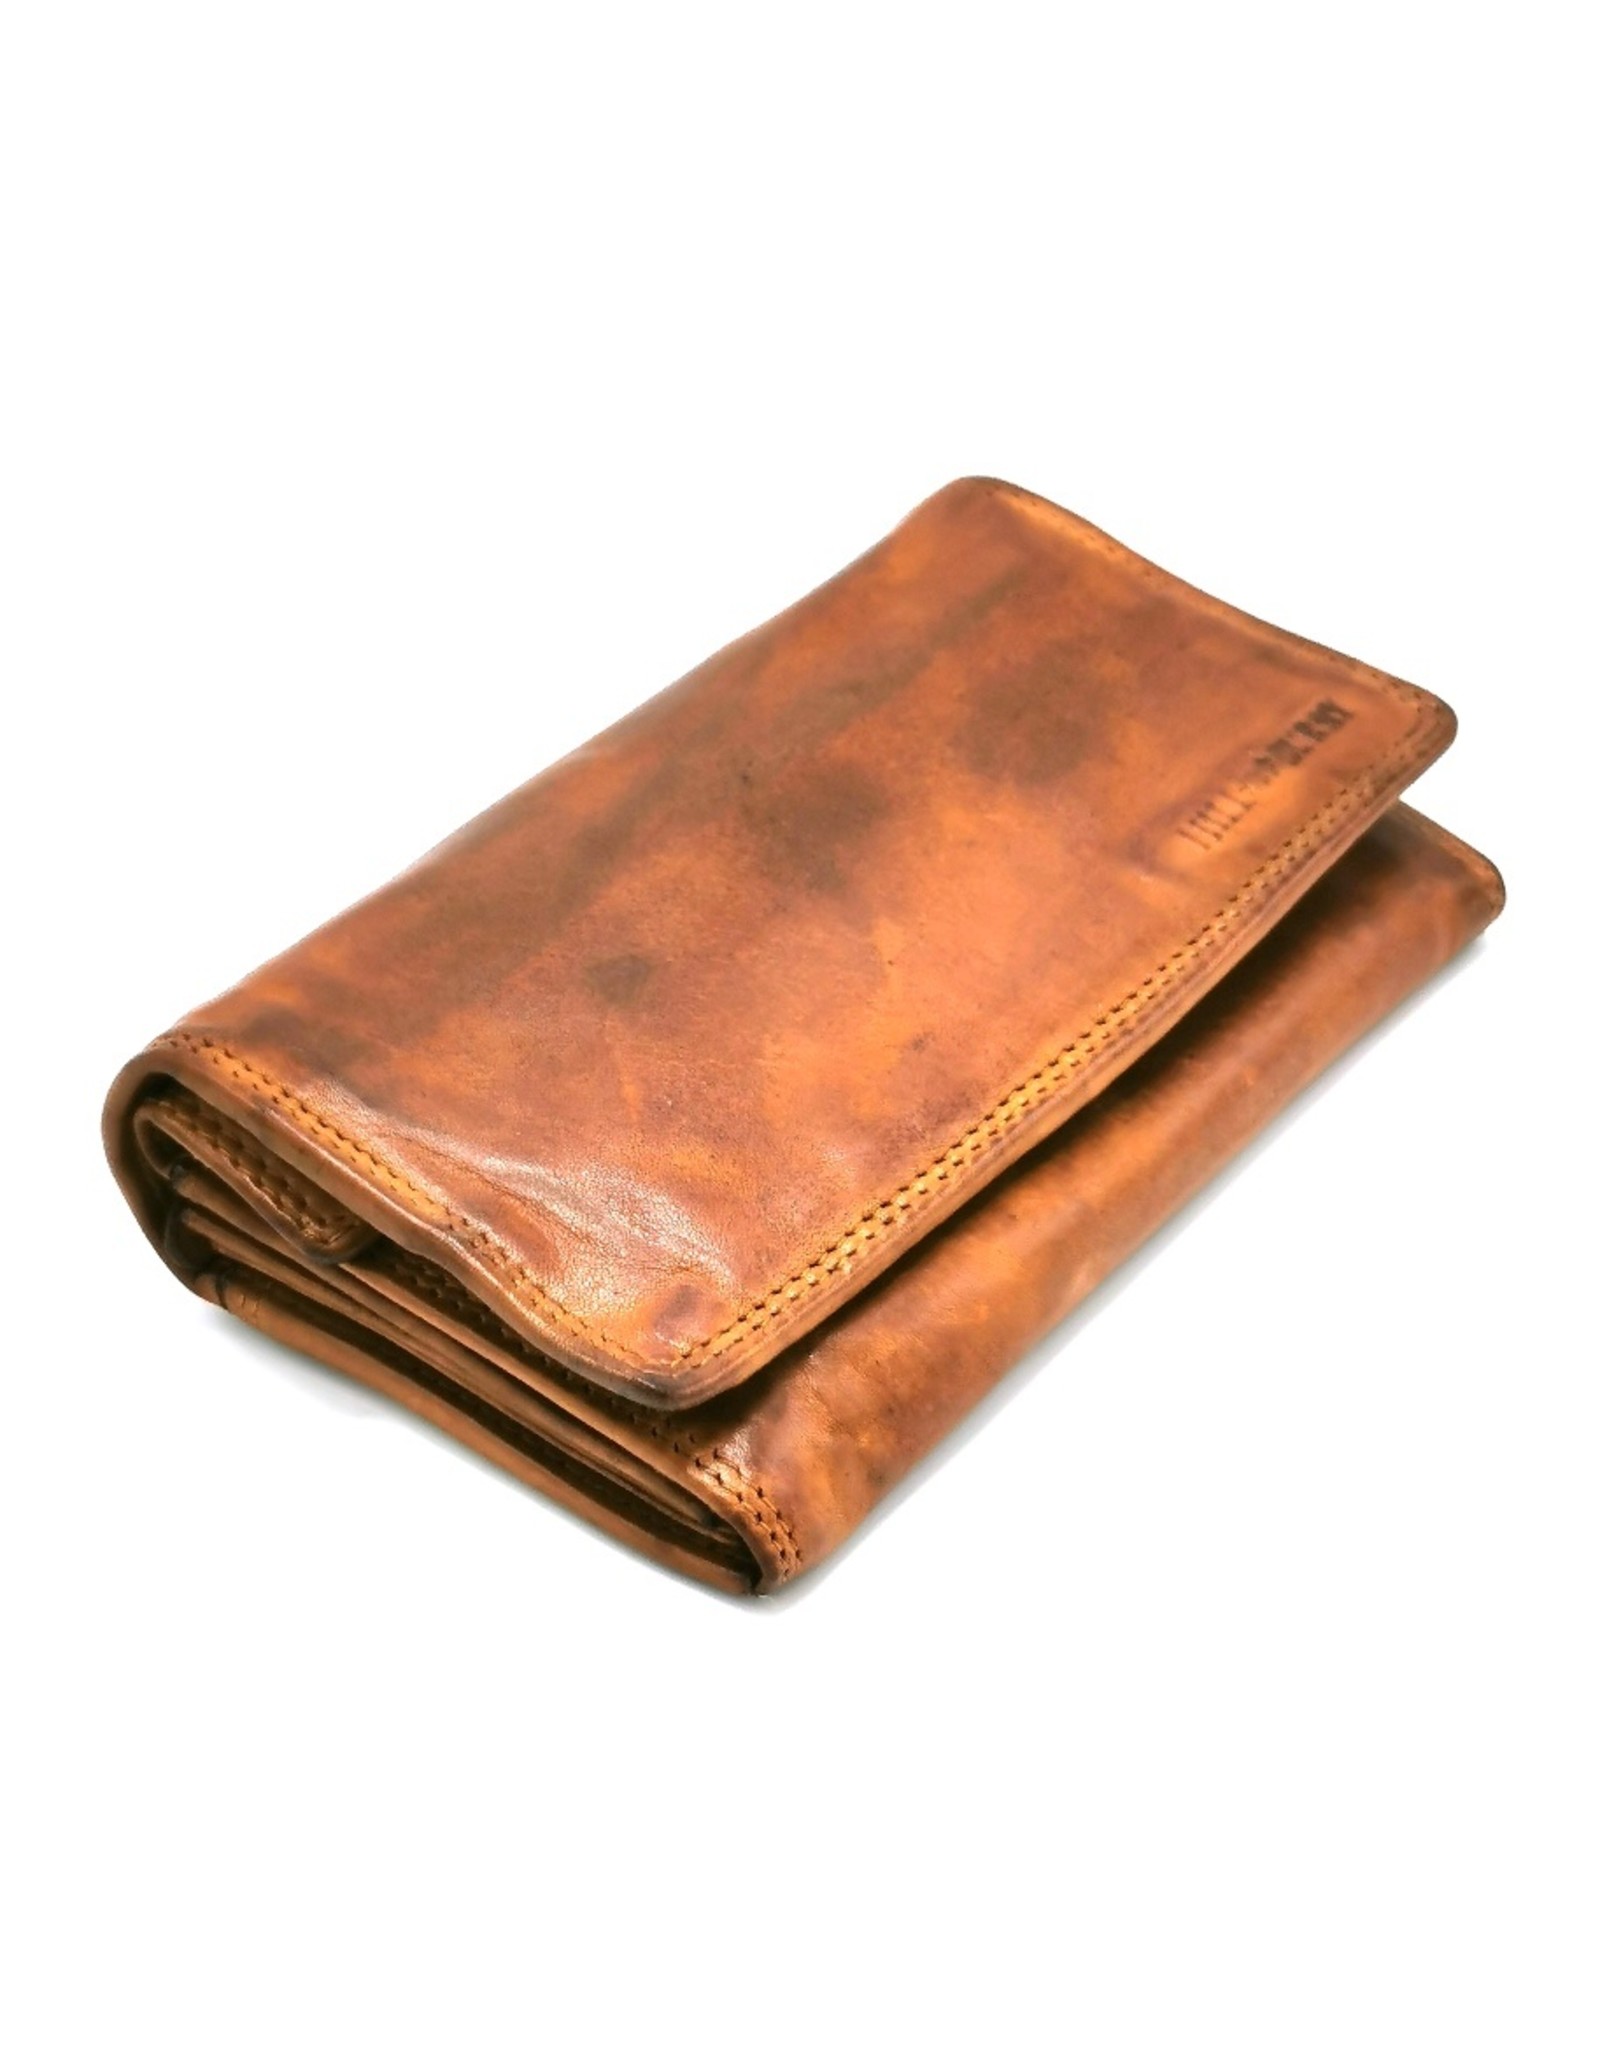 HillBurry Leather Wallets - Hillburry Wallet Washed Leather Large